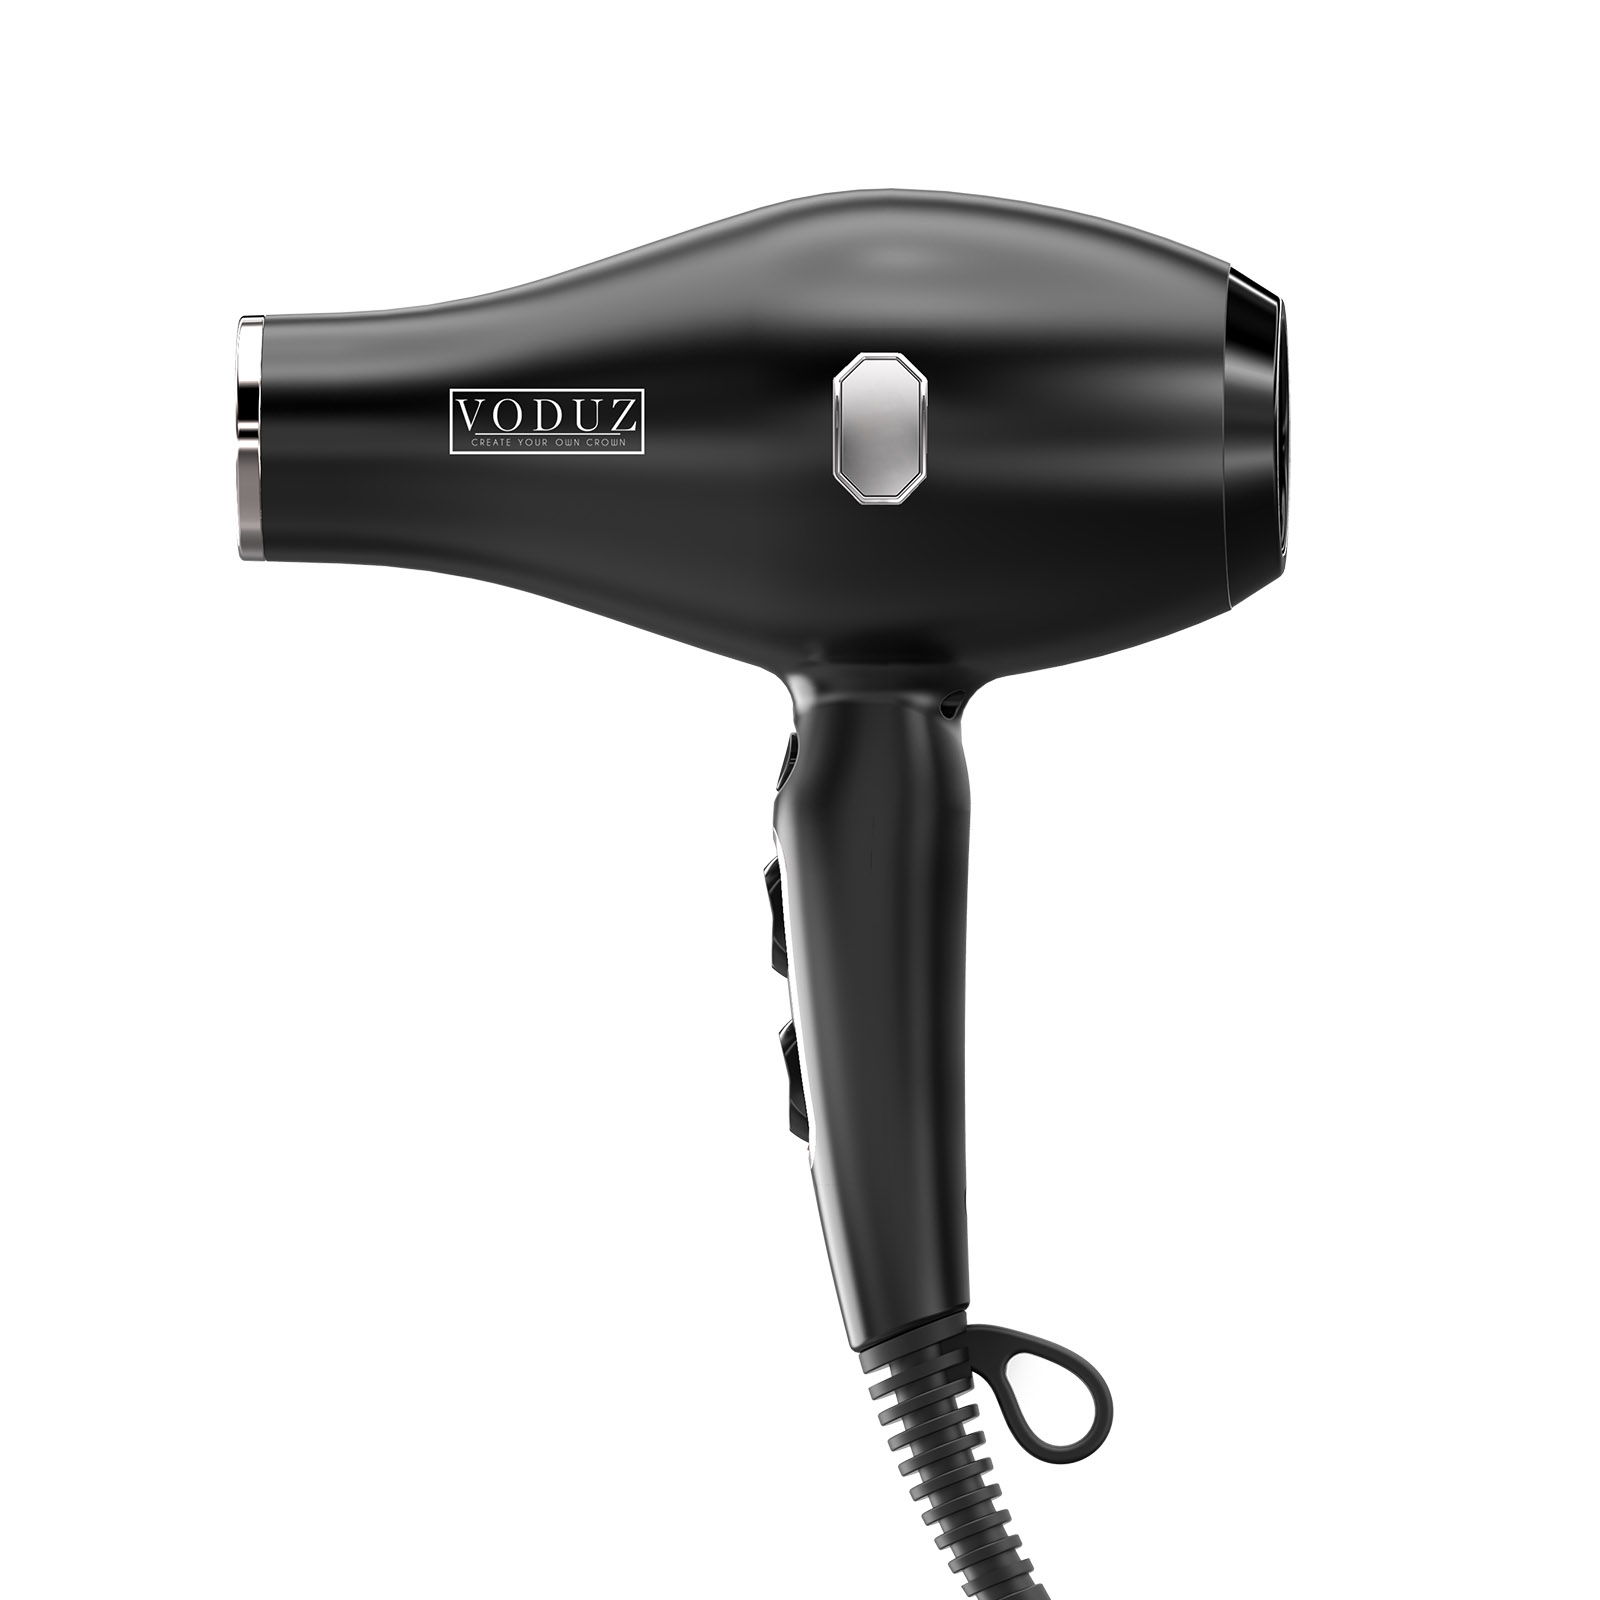 Voduz Blow Out Infrared Hair Dryer Black Madigan's Pharmacy